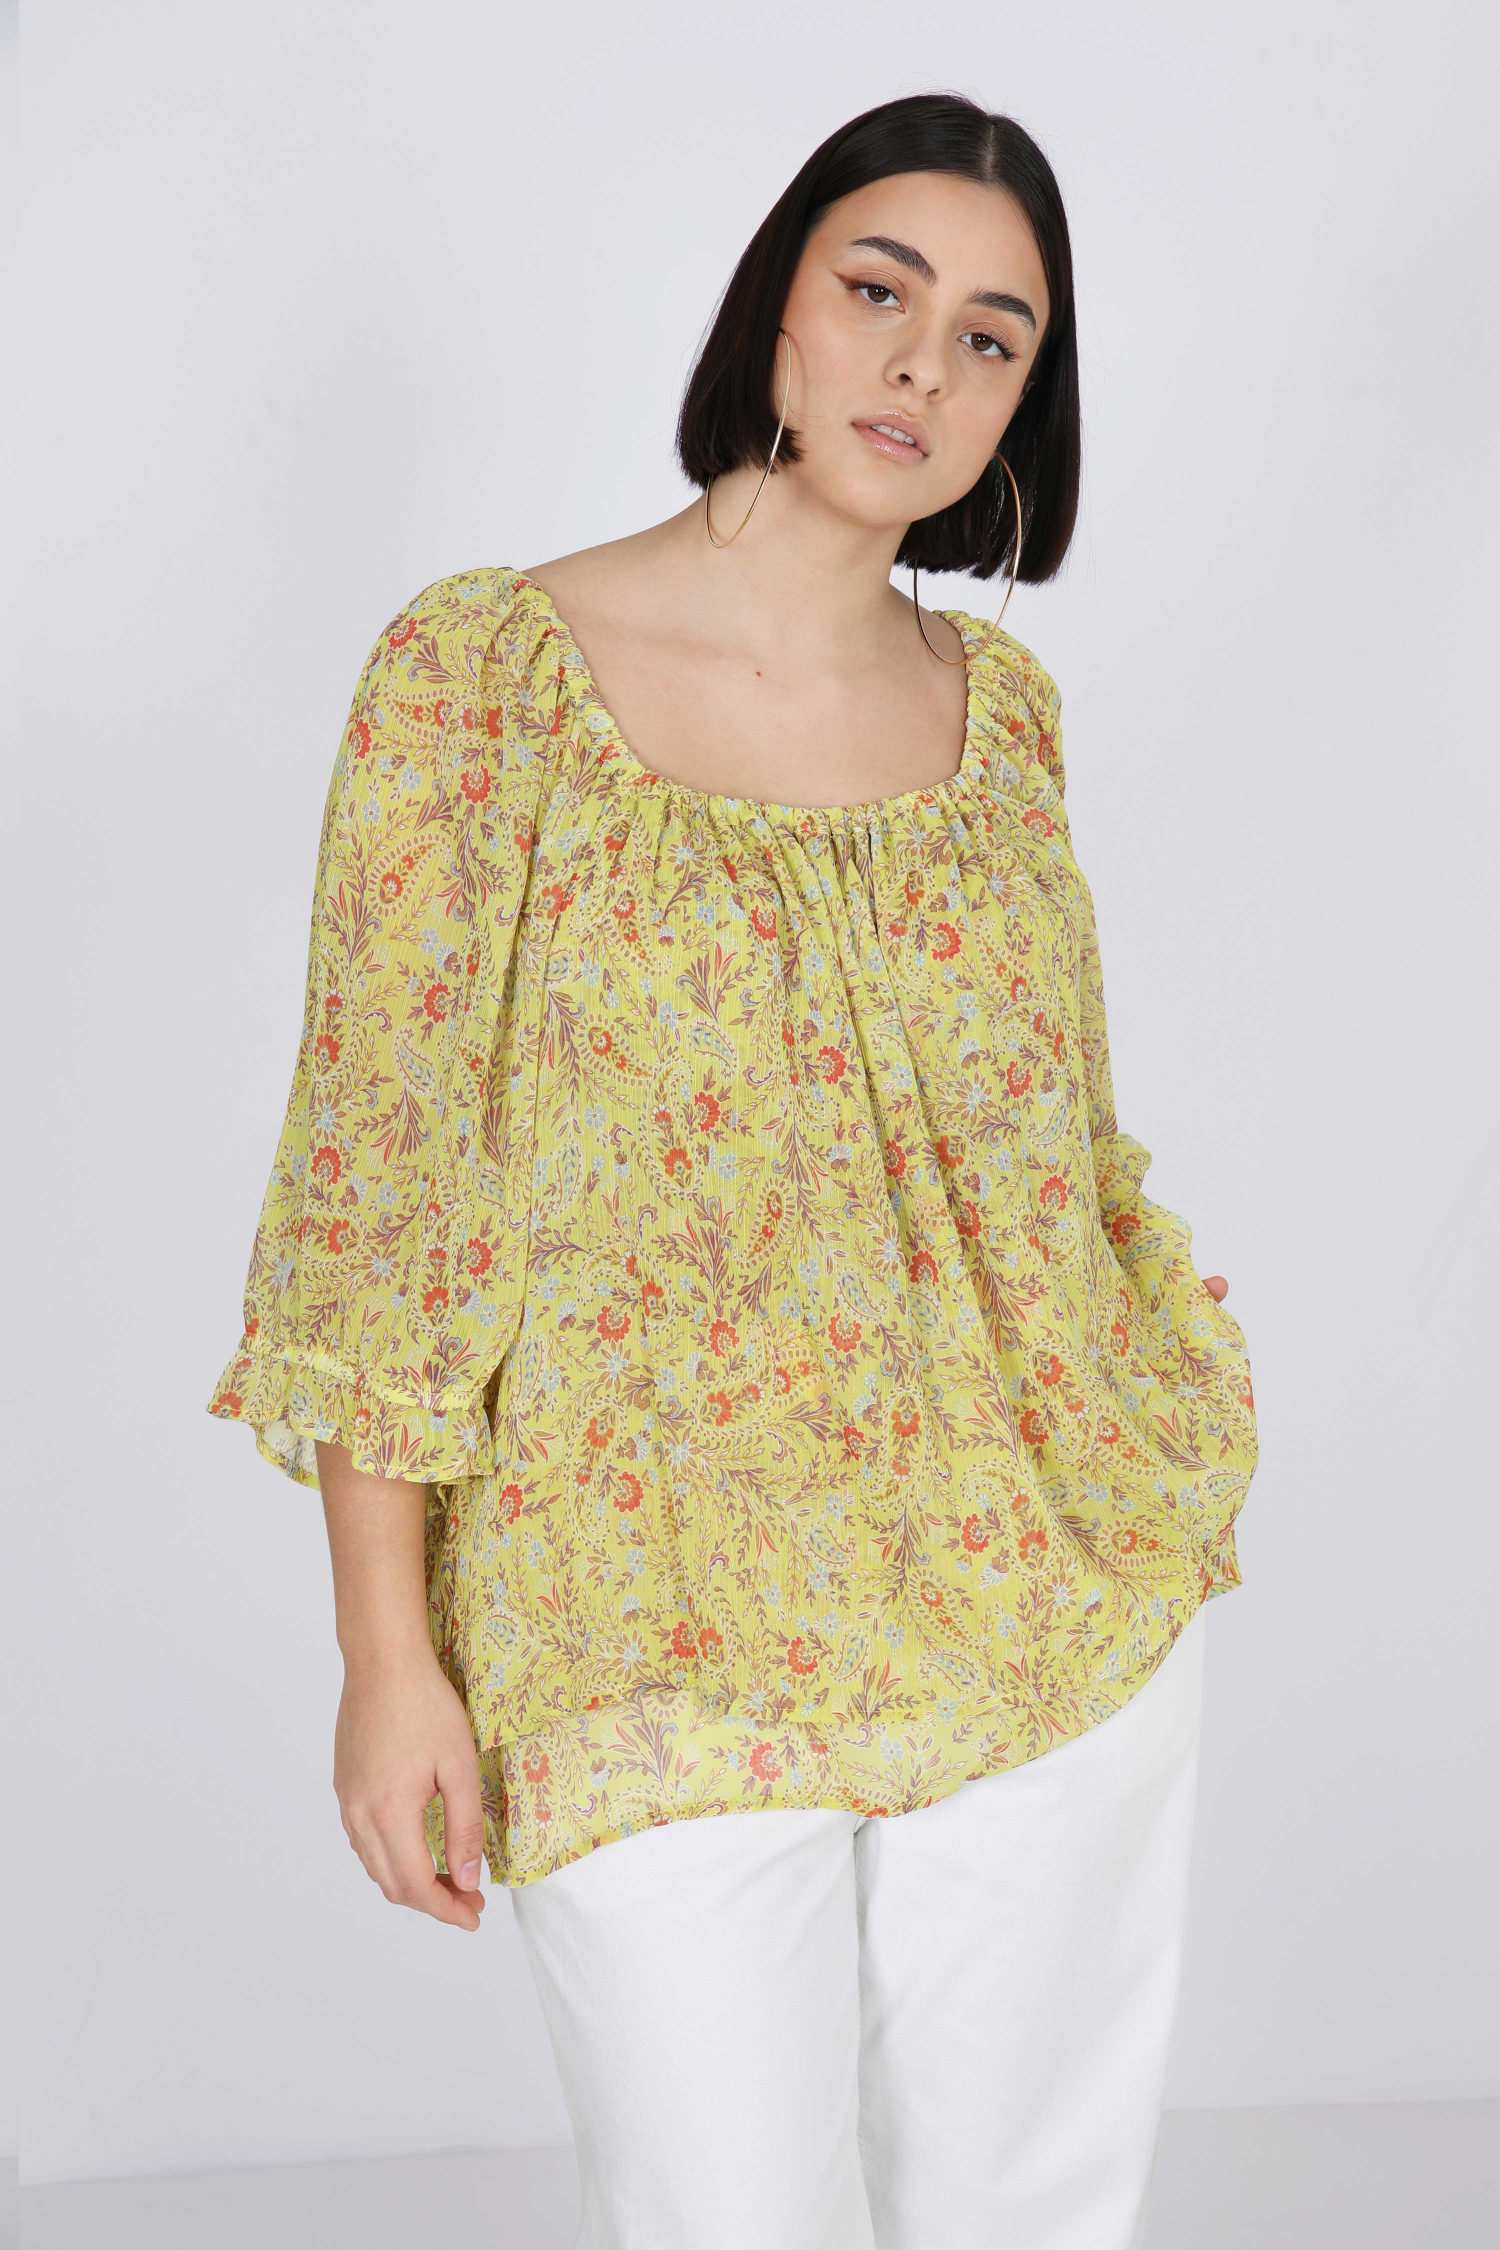 Blouse lined in printed voile